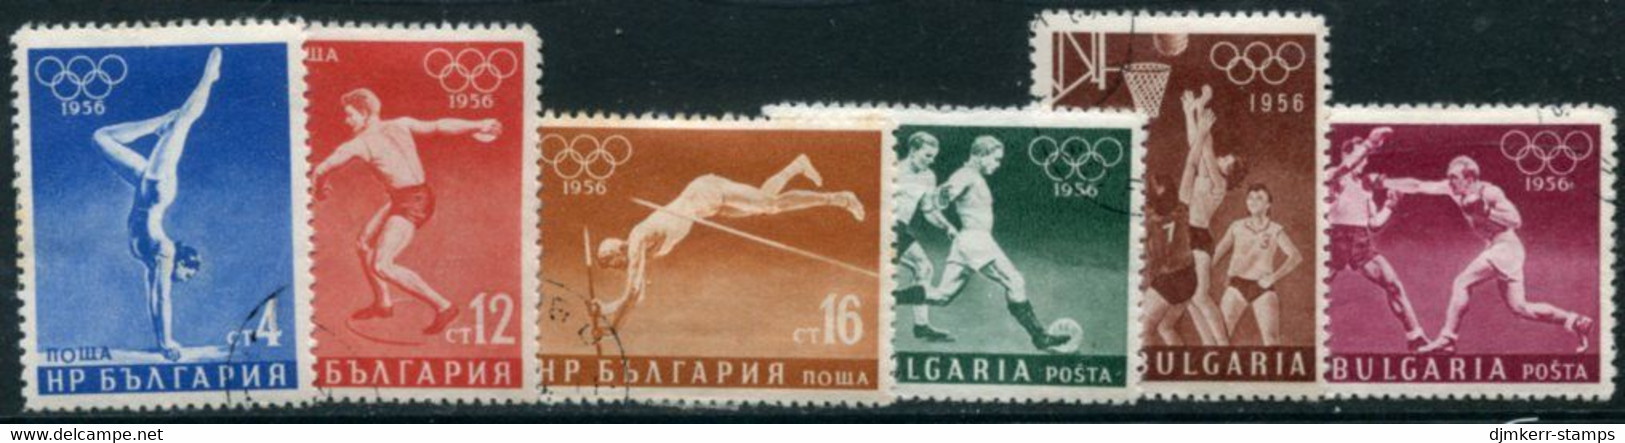 BULGARIA 1956 Olympic Games Used.  Michel 996-1001 - Used Stamps